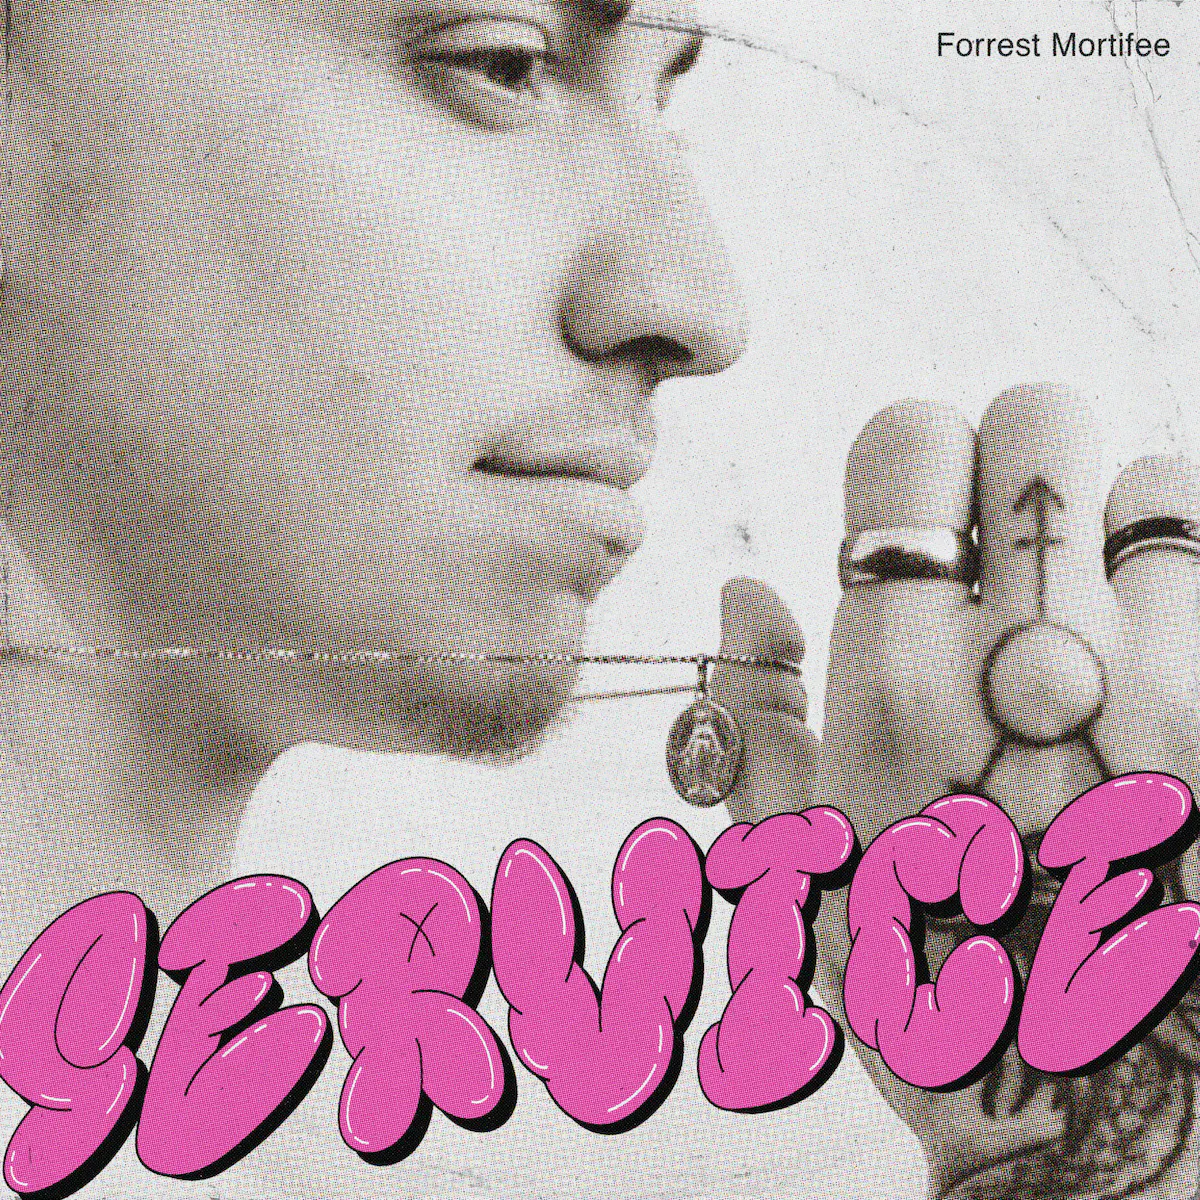 Service 💞 [song]